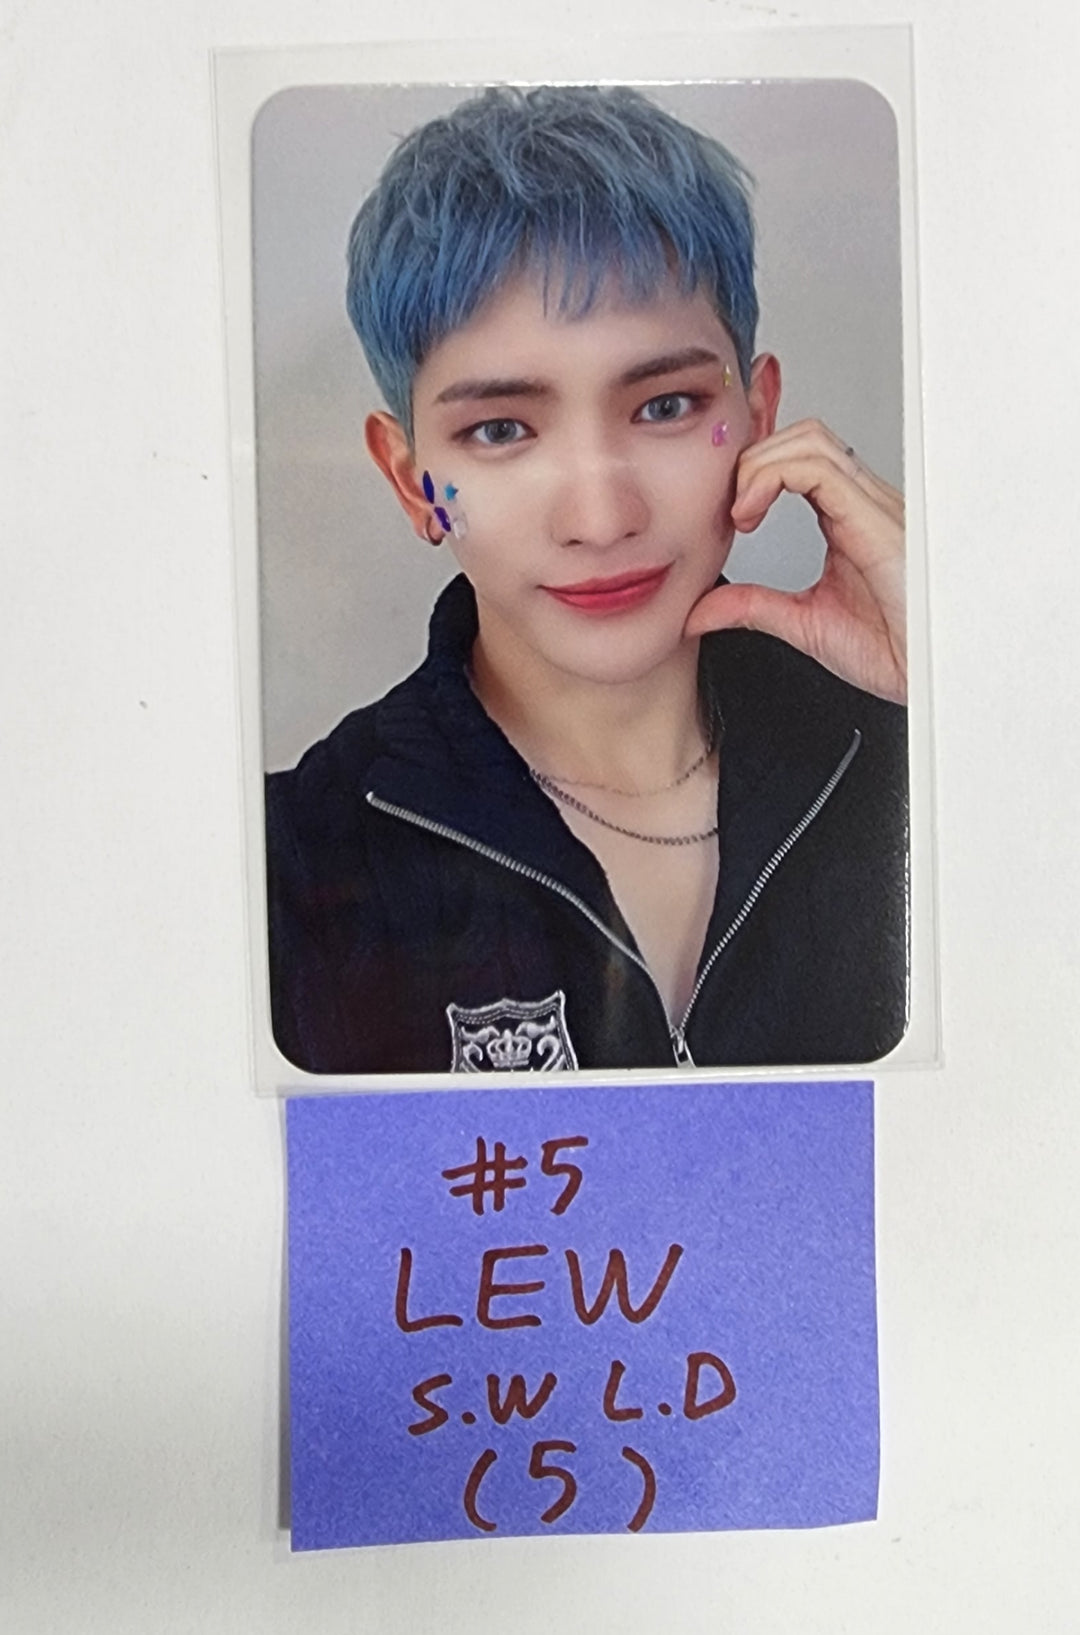 TEMPEST "폭풍속으로" - Soundwave Lucky Draw Event Photocard [23.10.26]